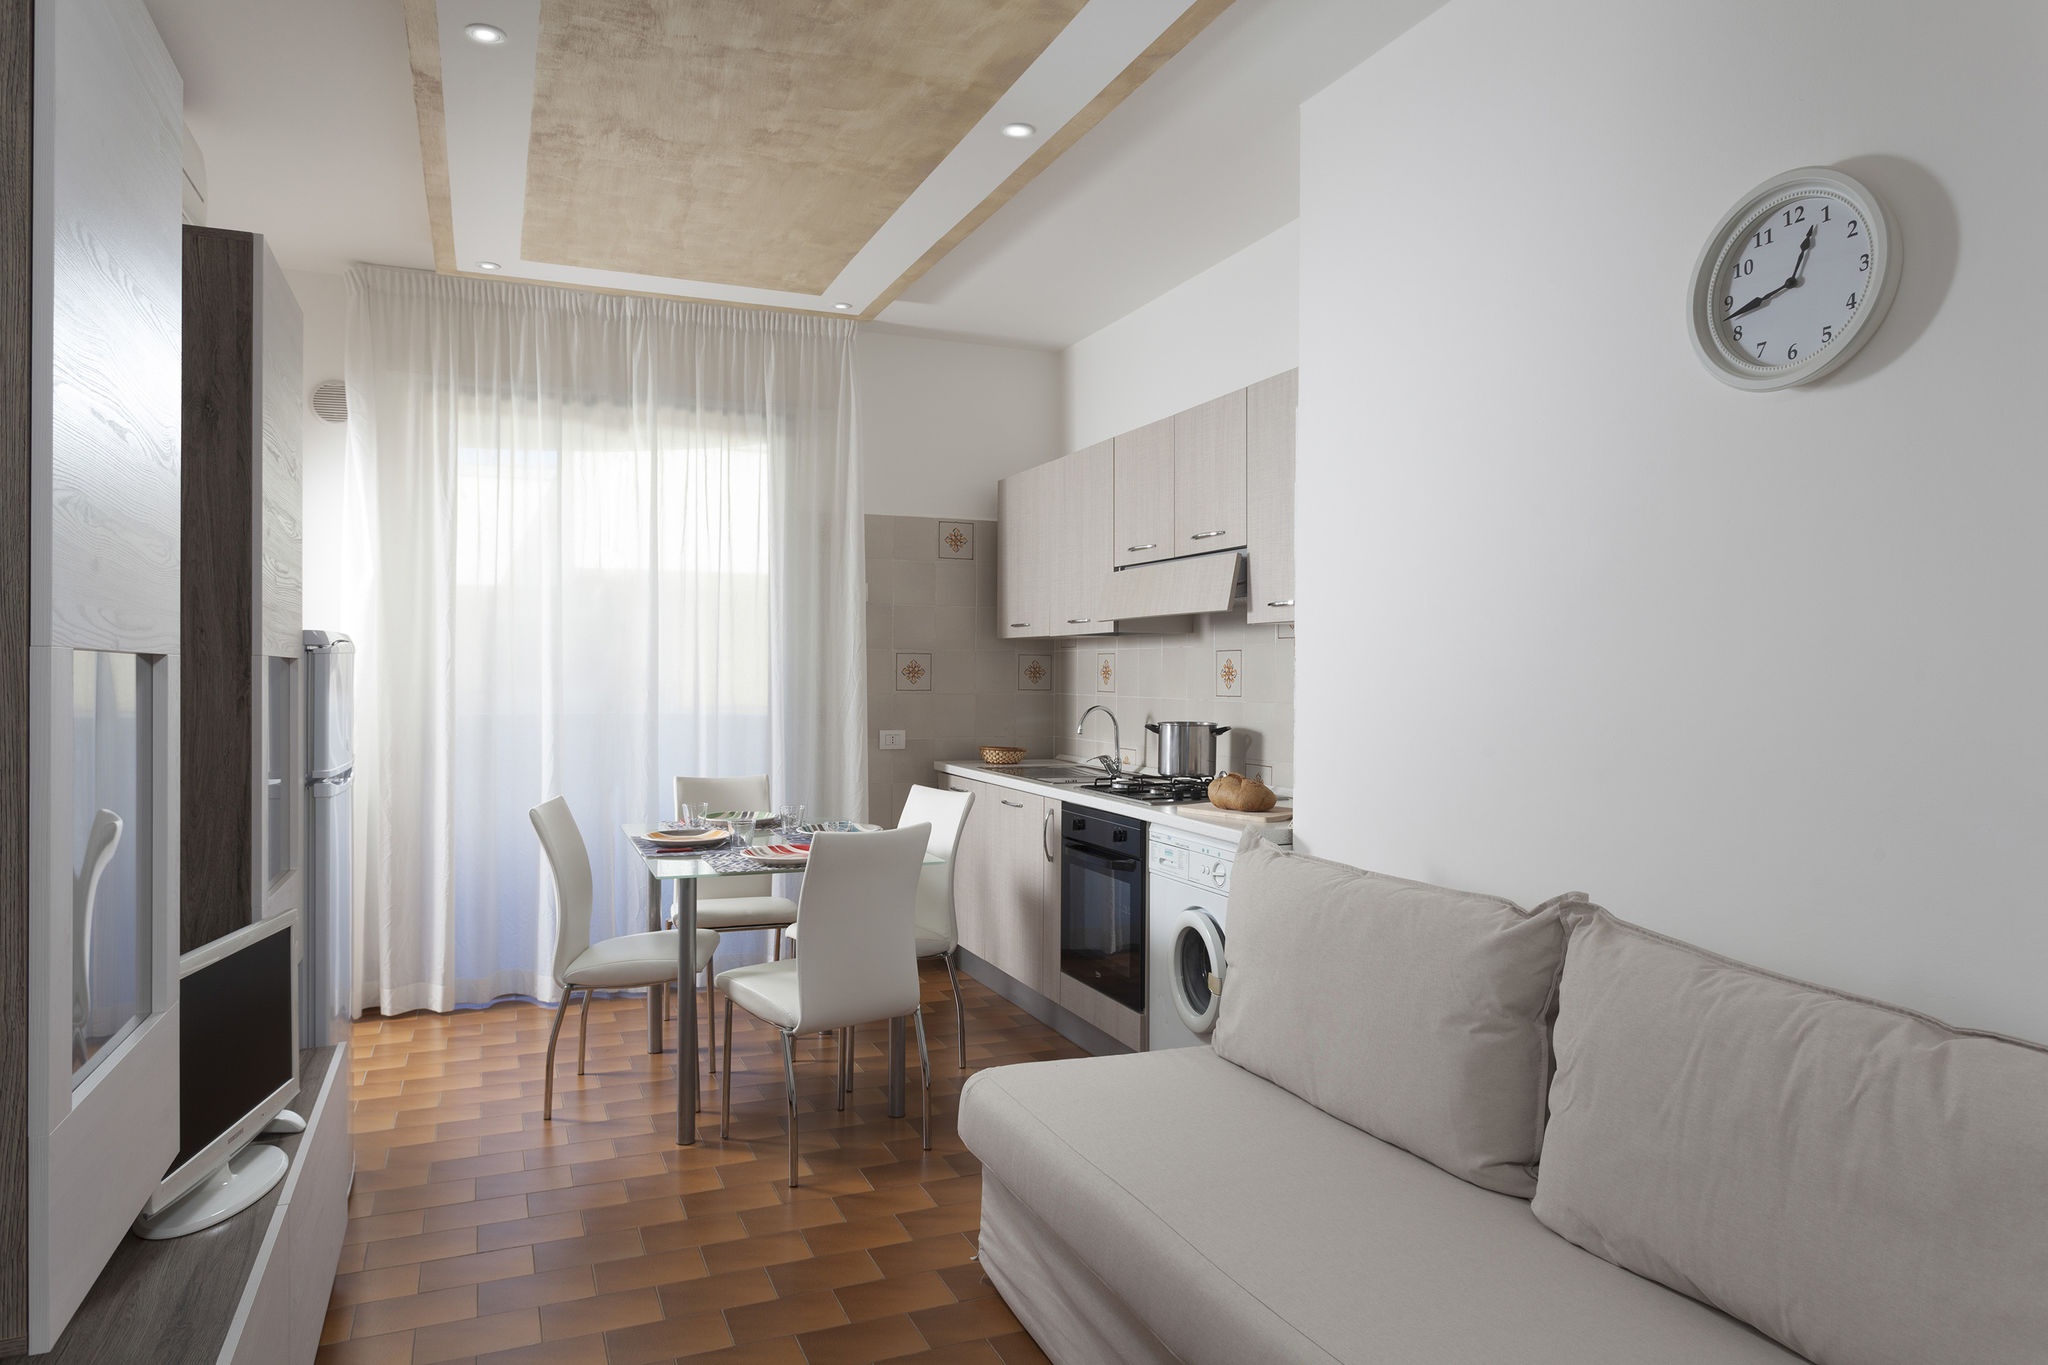 Renovated apartment in northern zone of Riccione, 100 meters from the sea.